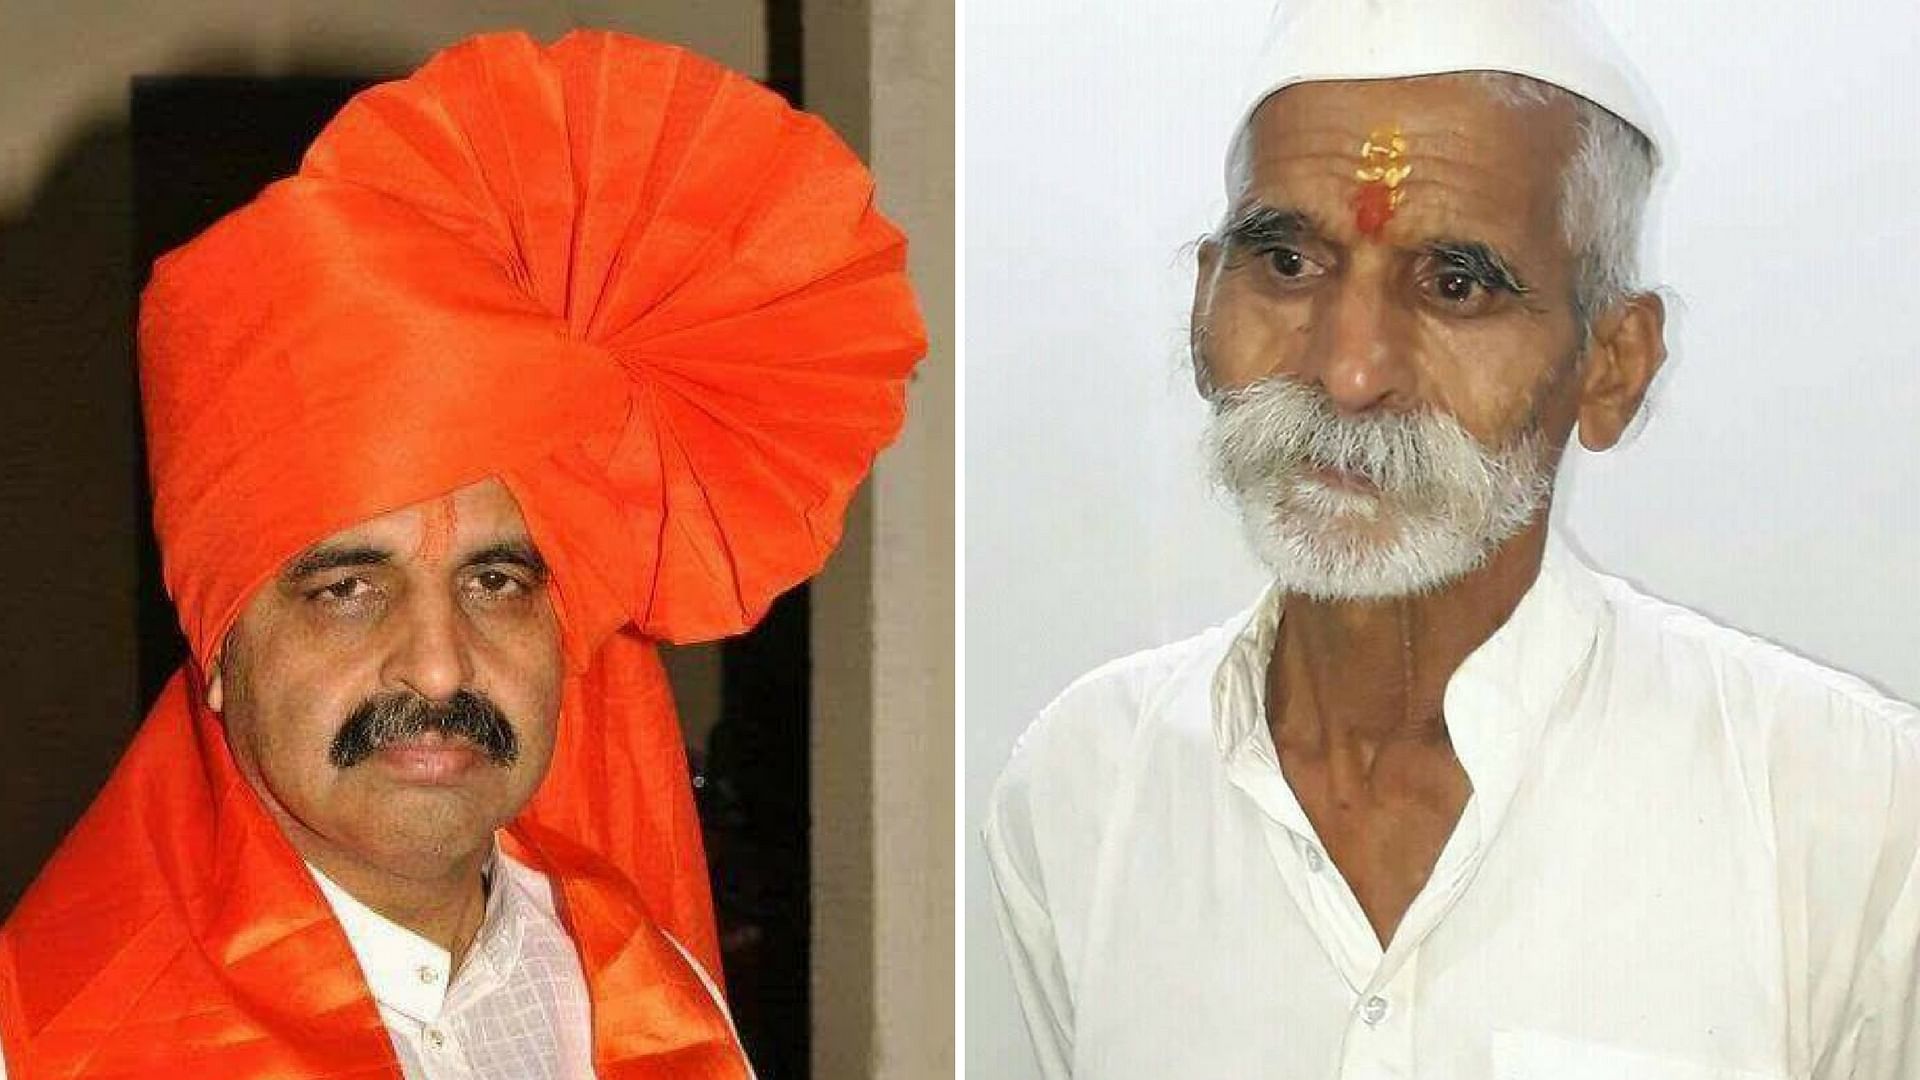 Milind Ekbote (left) and Sambhaji Bhide (right) are at the center of the violence against Dalits in Maharashtra and the ensuing chaos.&nbsp;